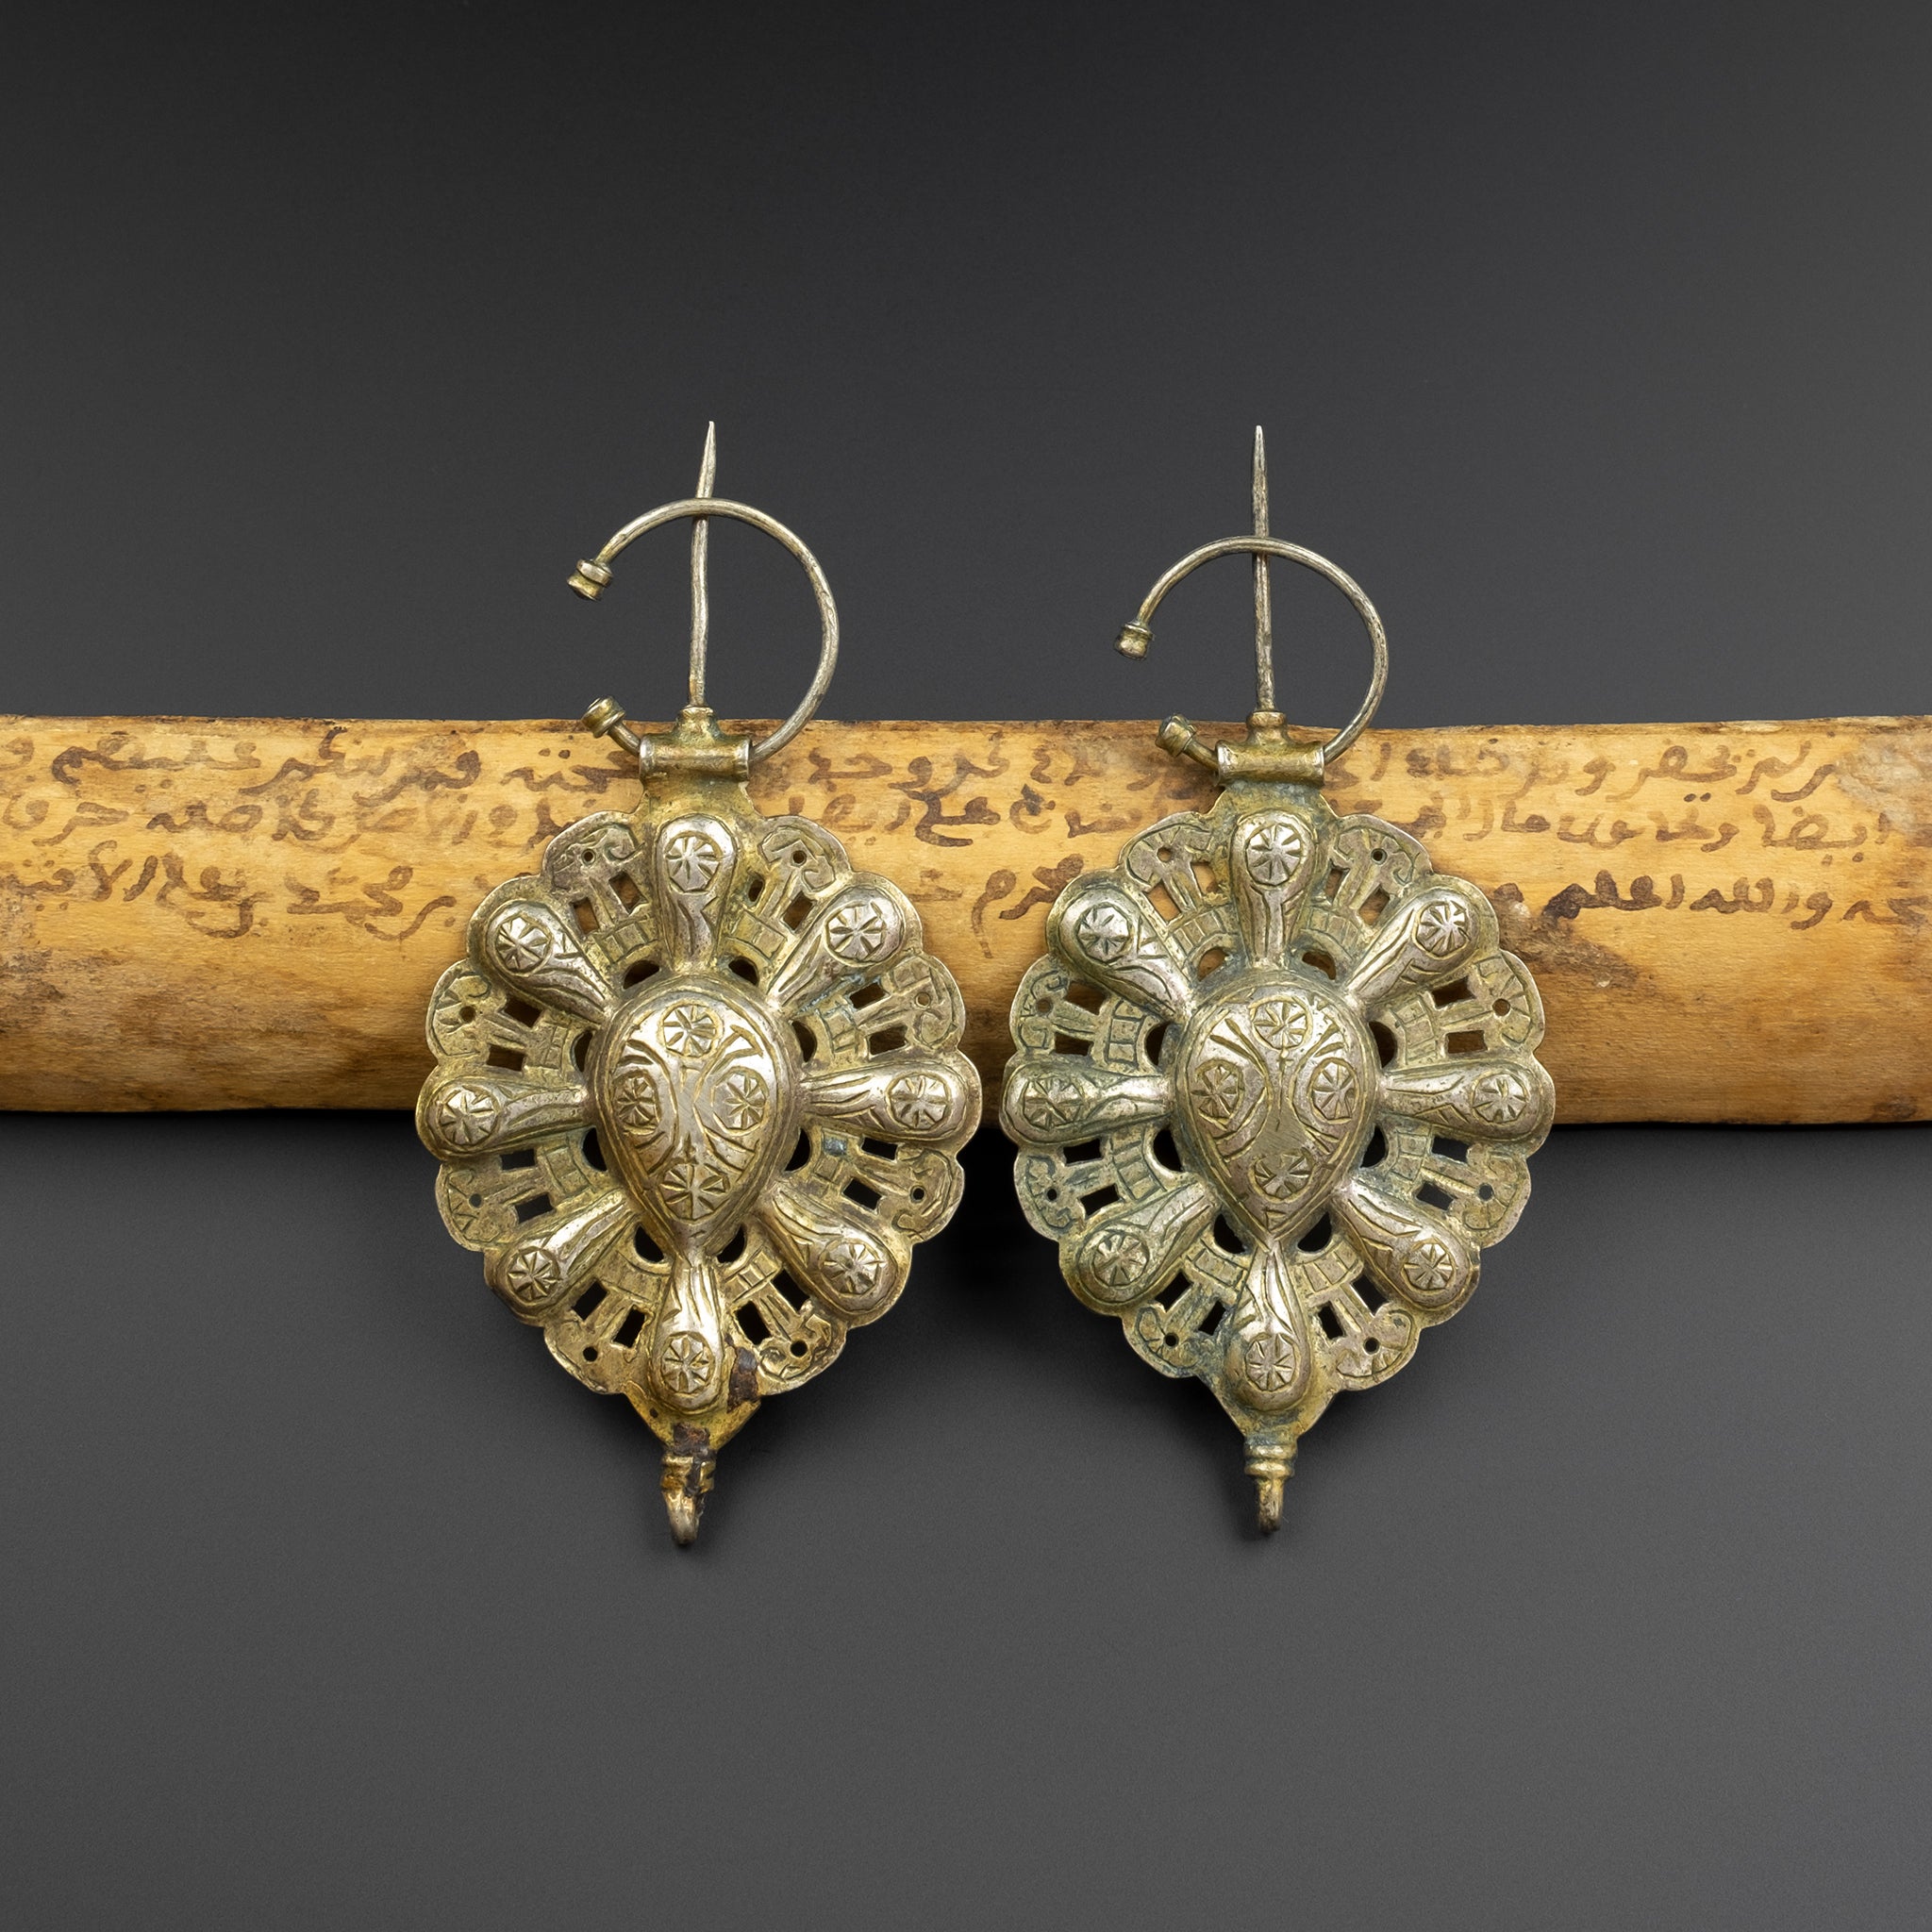 Vintage Pair of Silver Fibulae from Ouezzane, Morocco